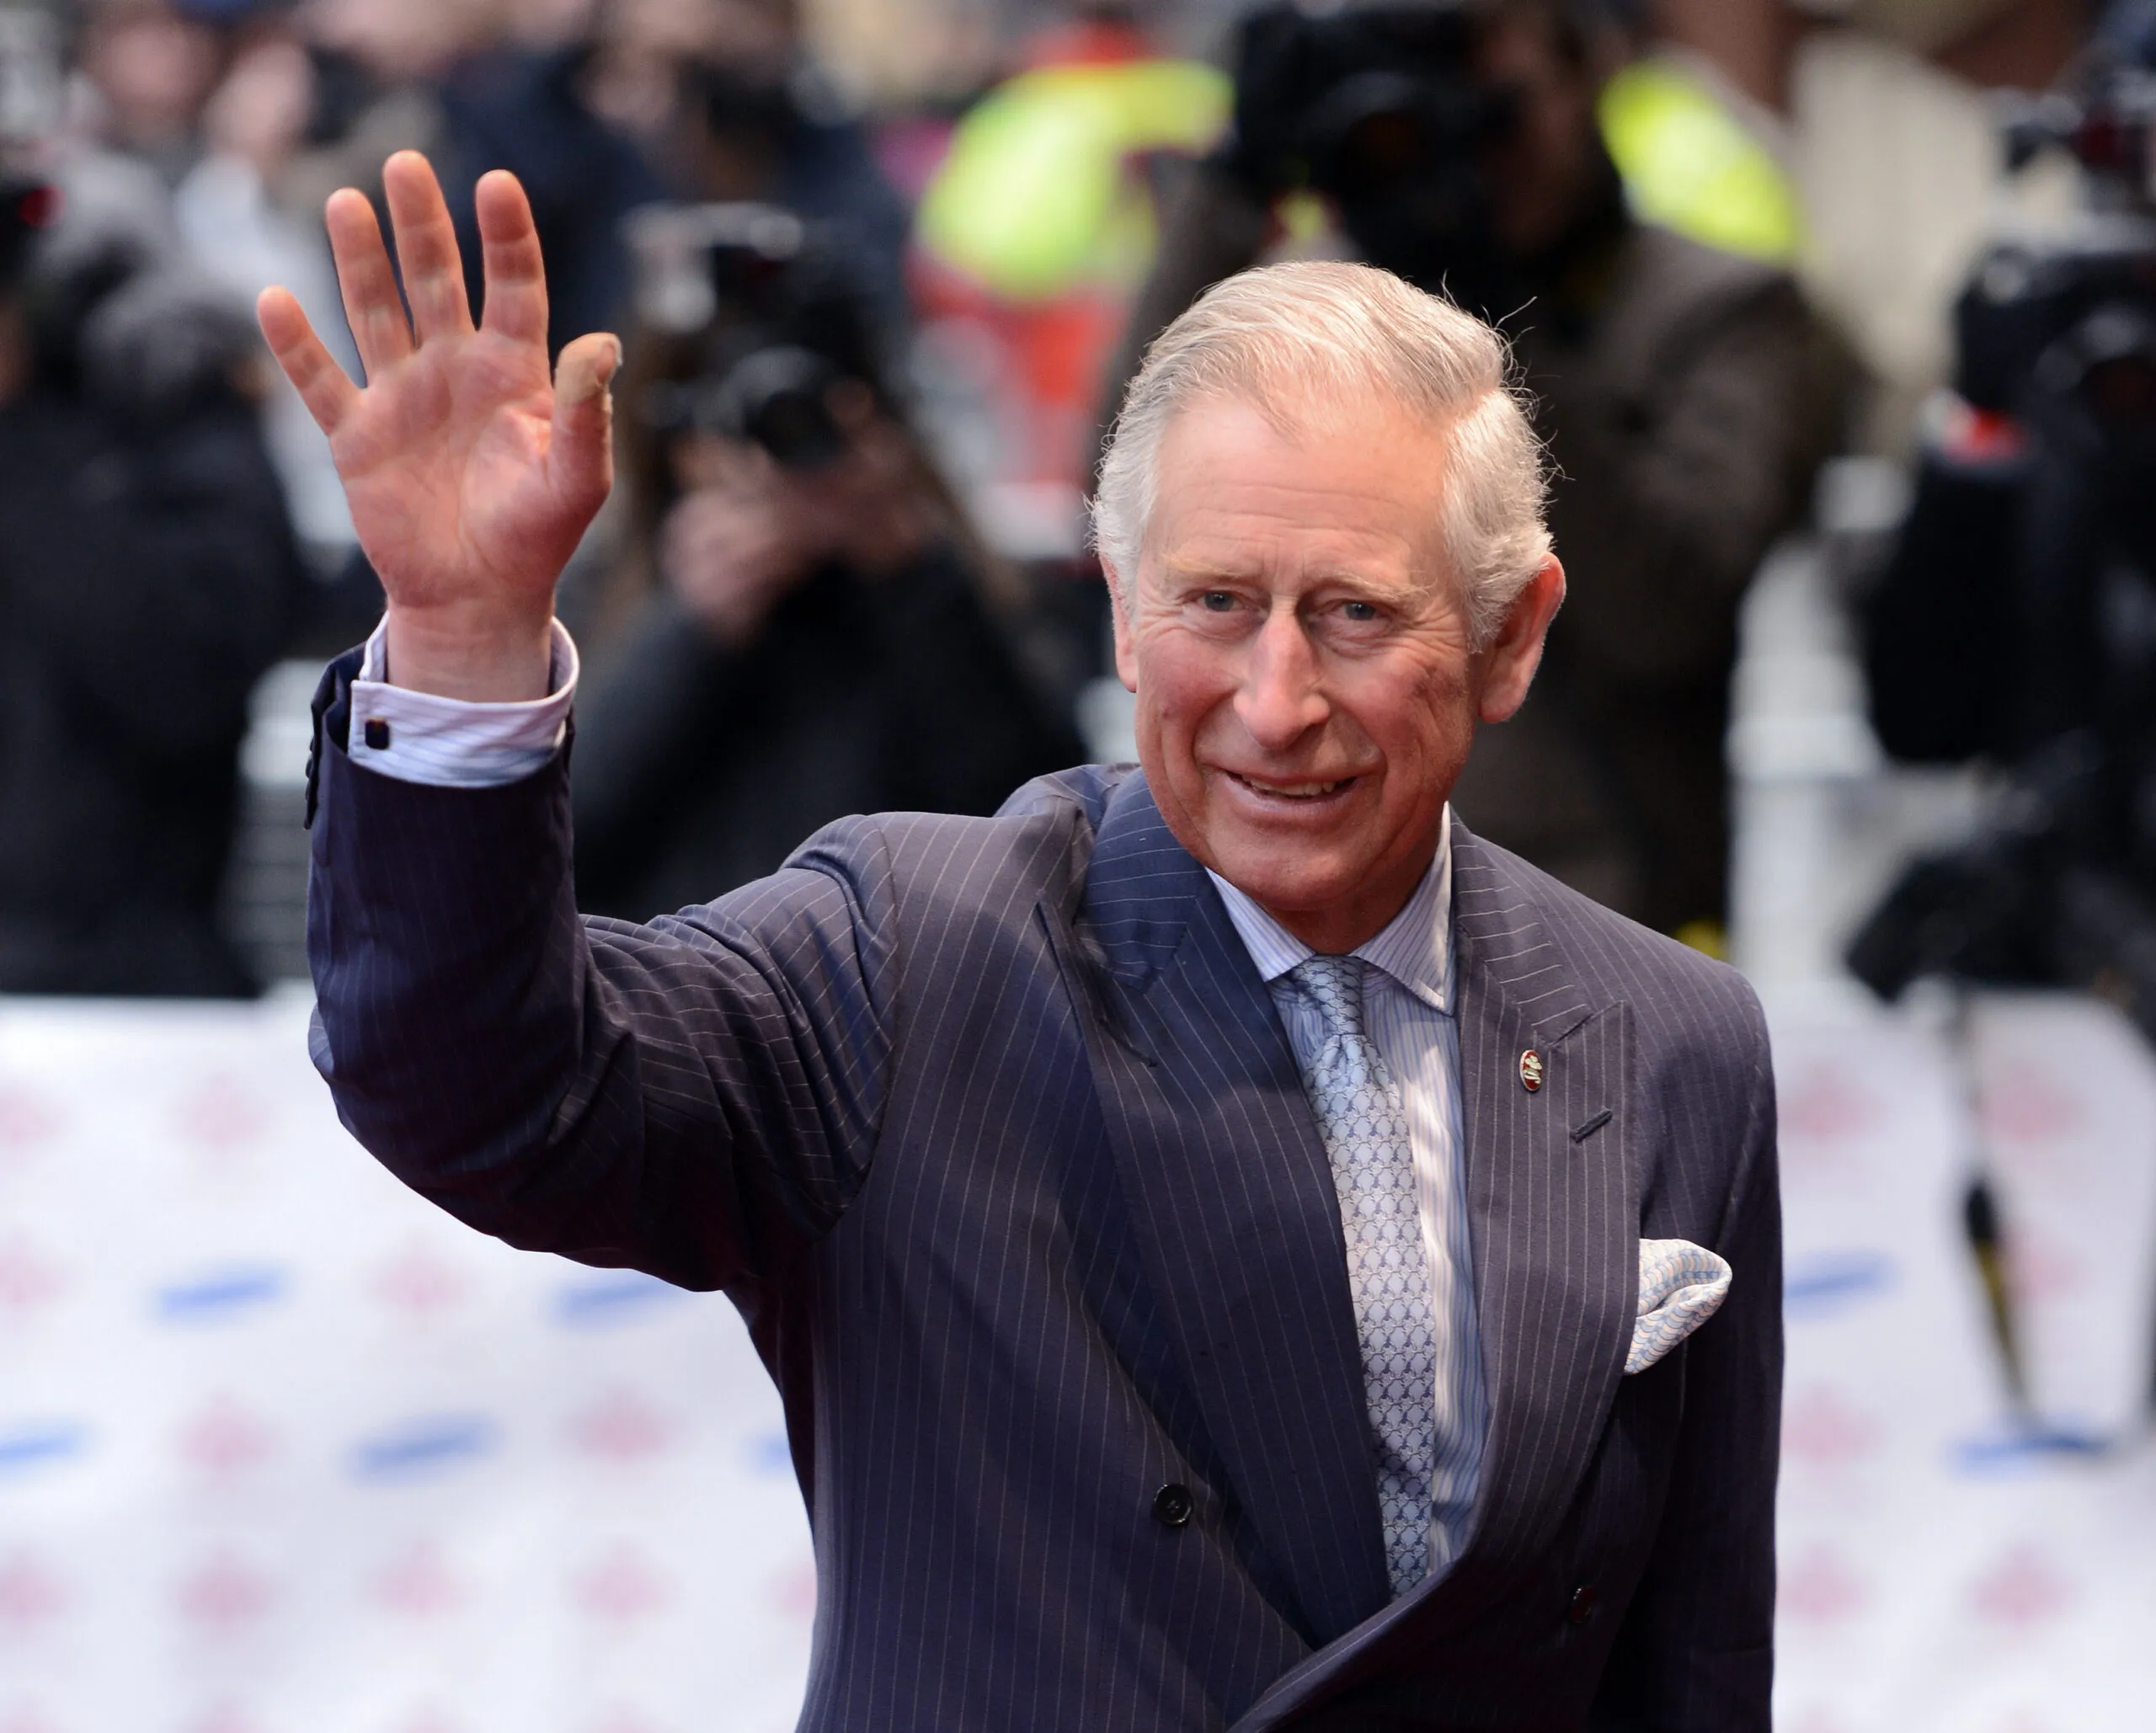 Things You Might Not Know About Prince Charles